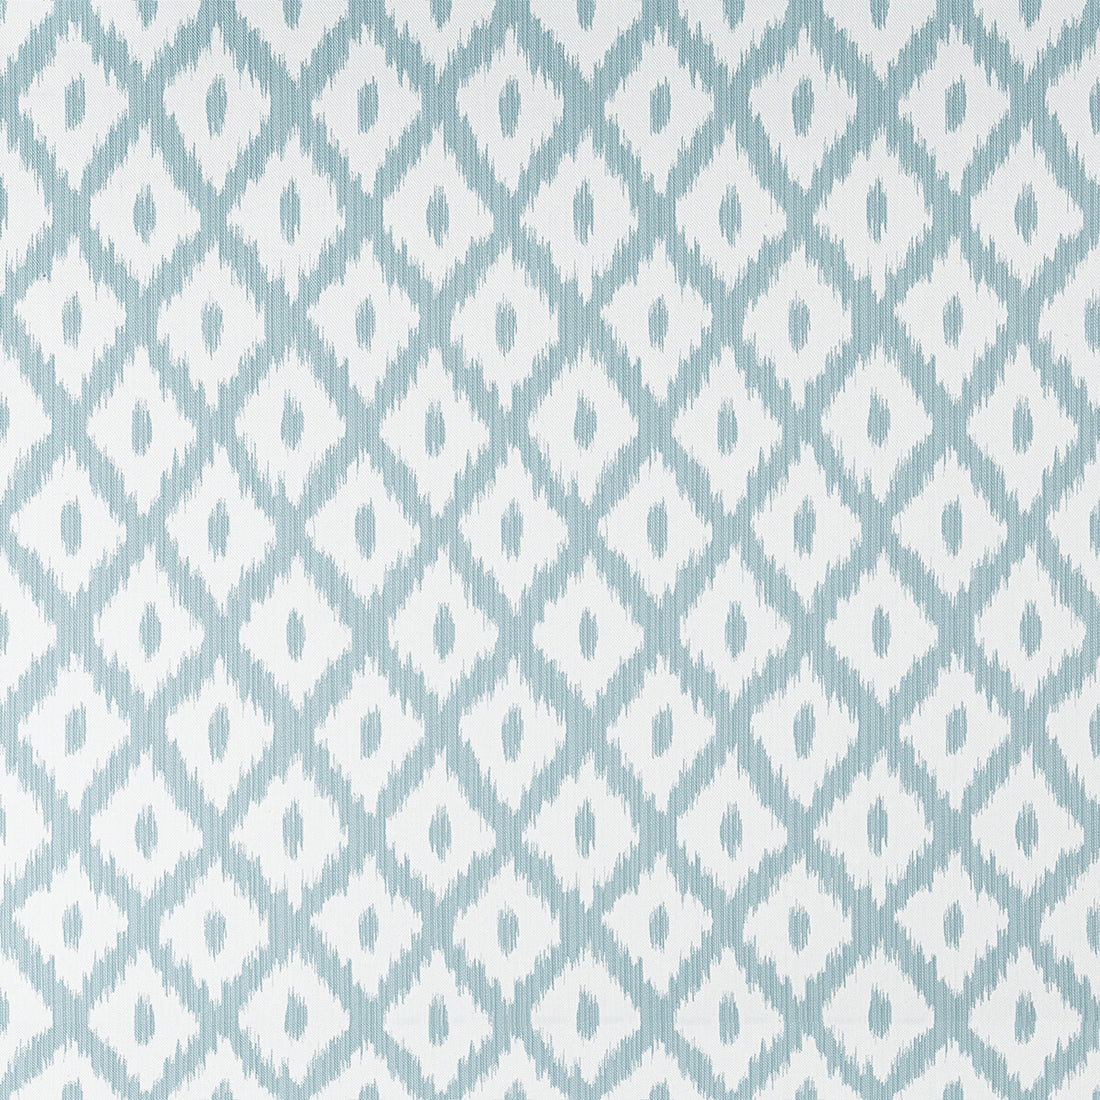 Pitigala fabric in turquoise color - pattern 35762.315.0 - by Kravet Basics in the Ceylon collection